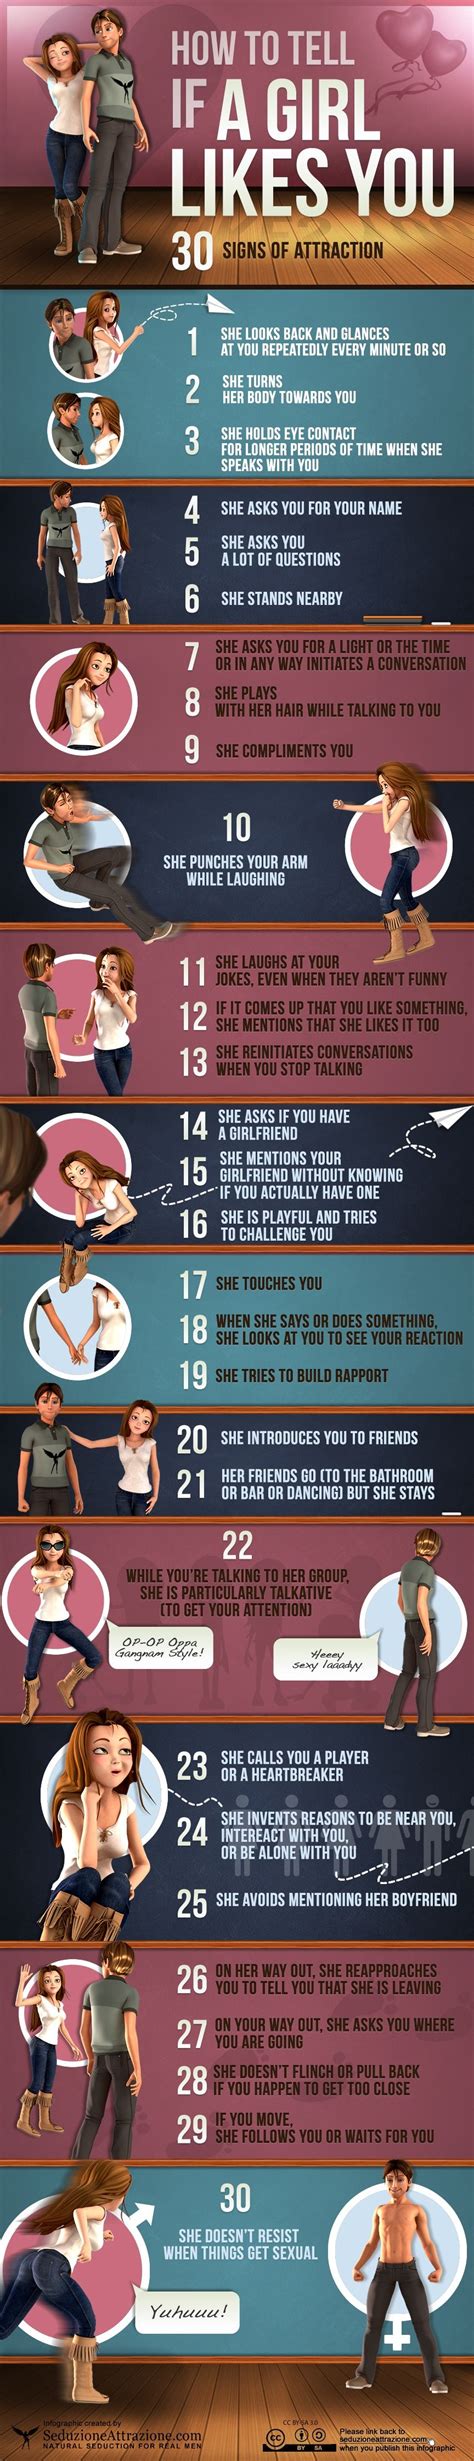 how can you tell if a girl likes you or not you need to look for these 30 signs of attract